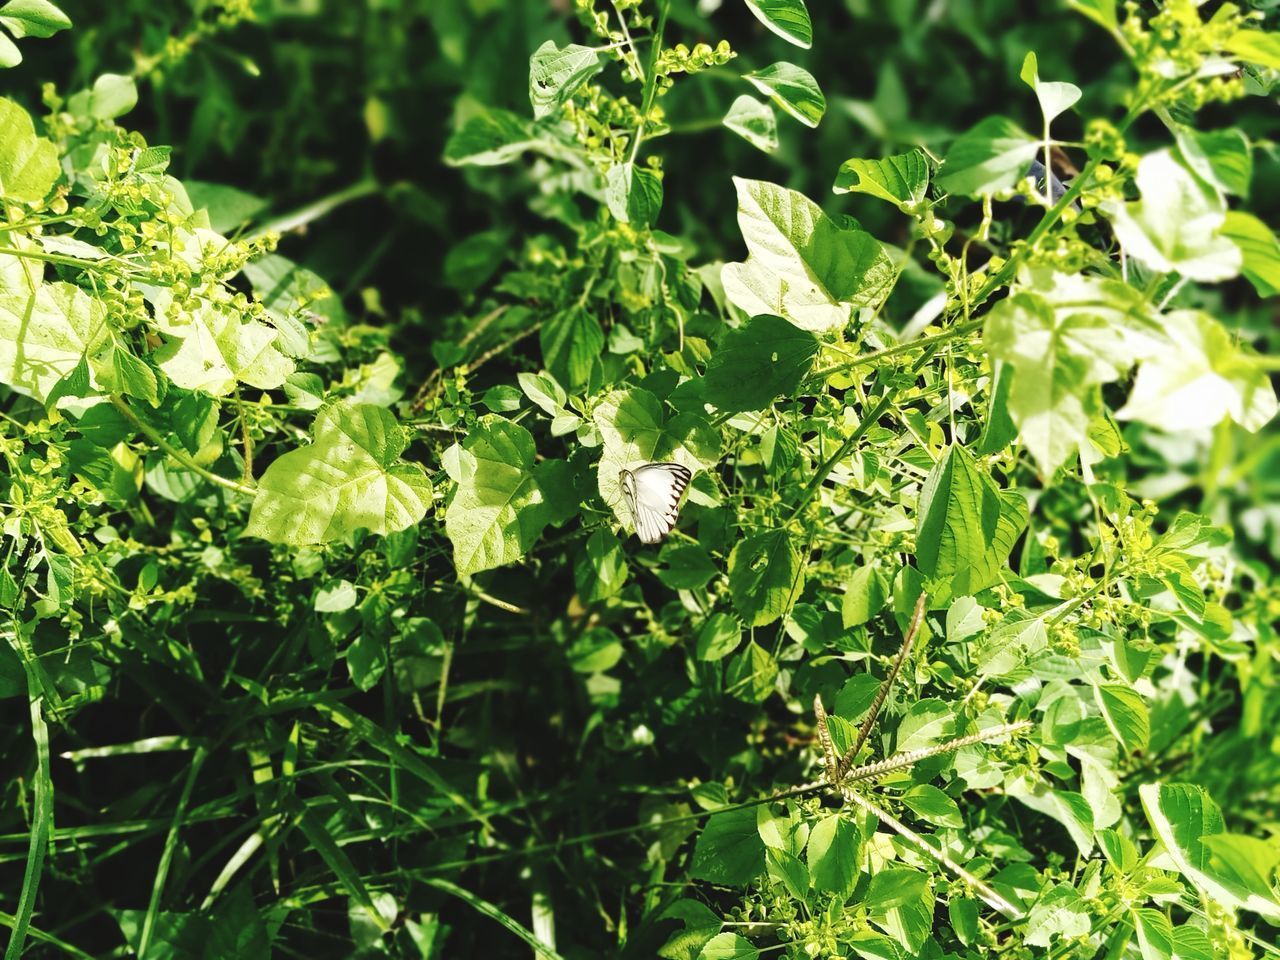 CLOSE-UP OF GREEN PLANT ON LAND